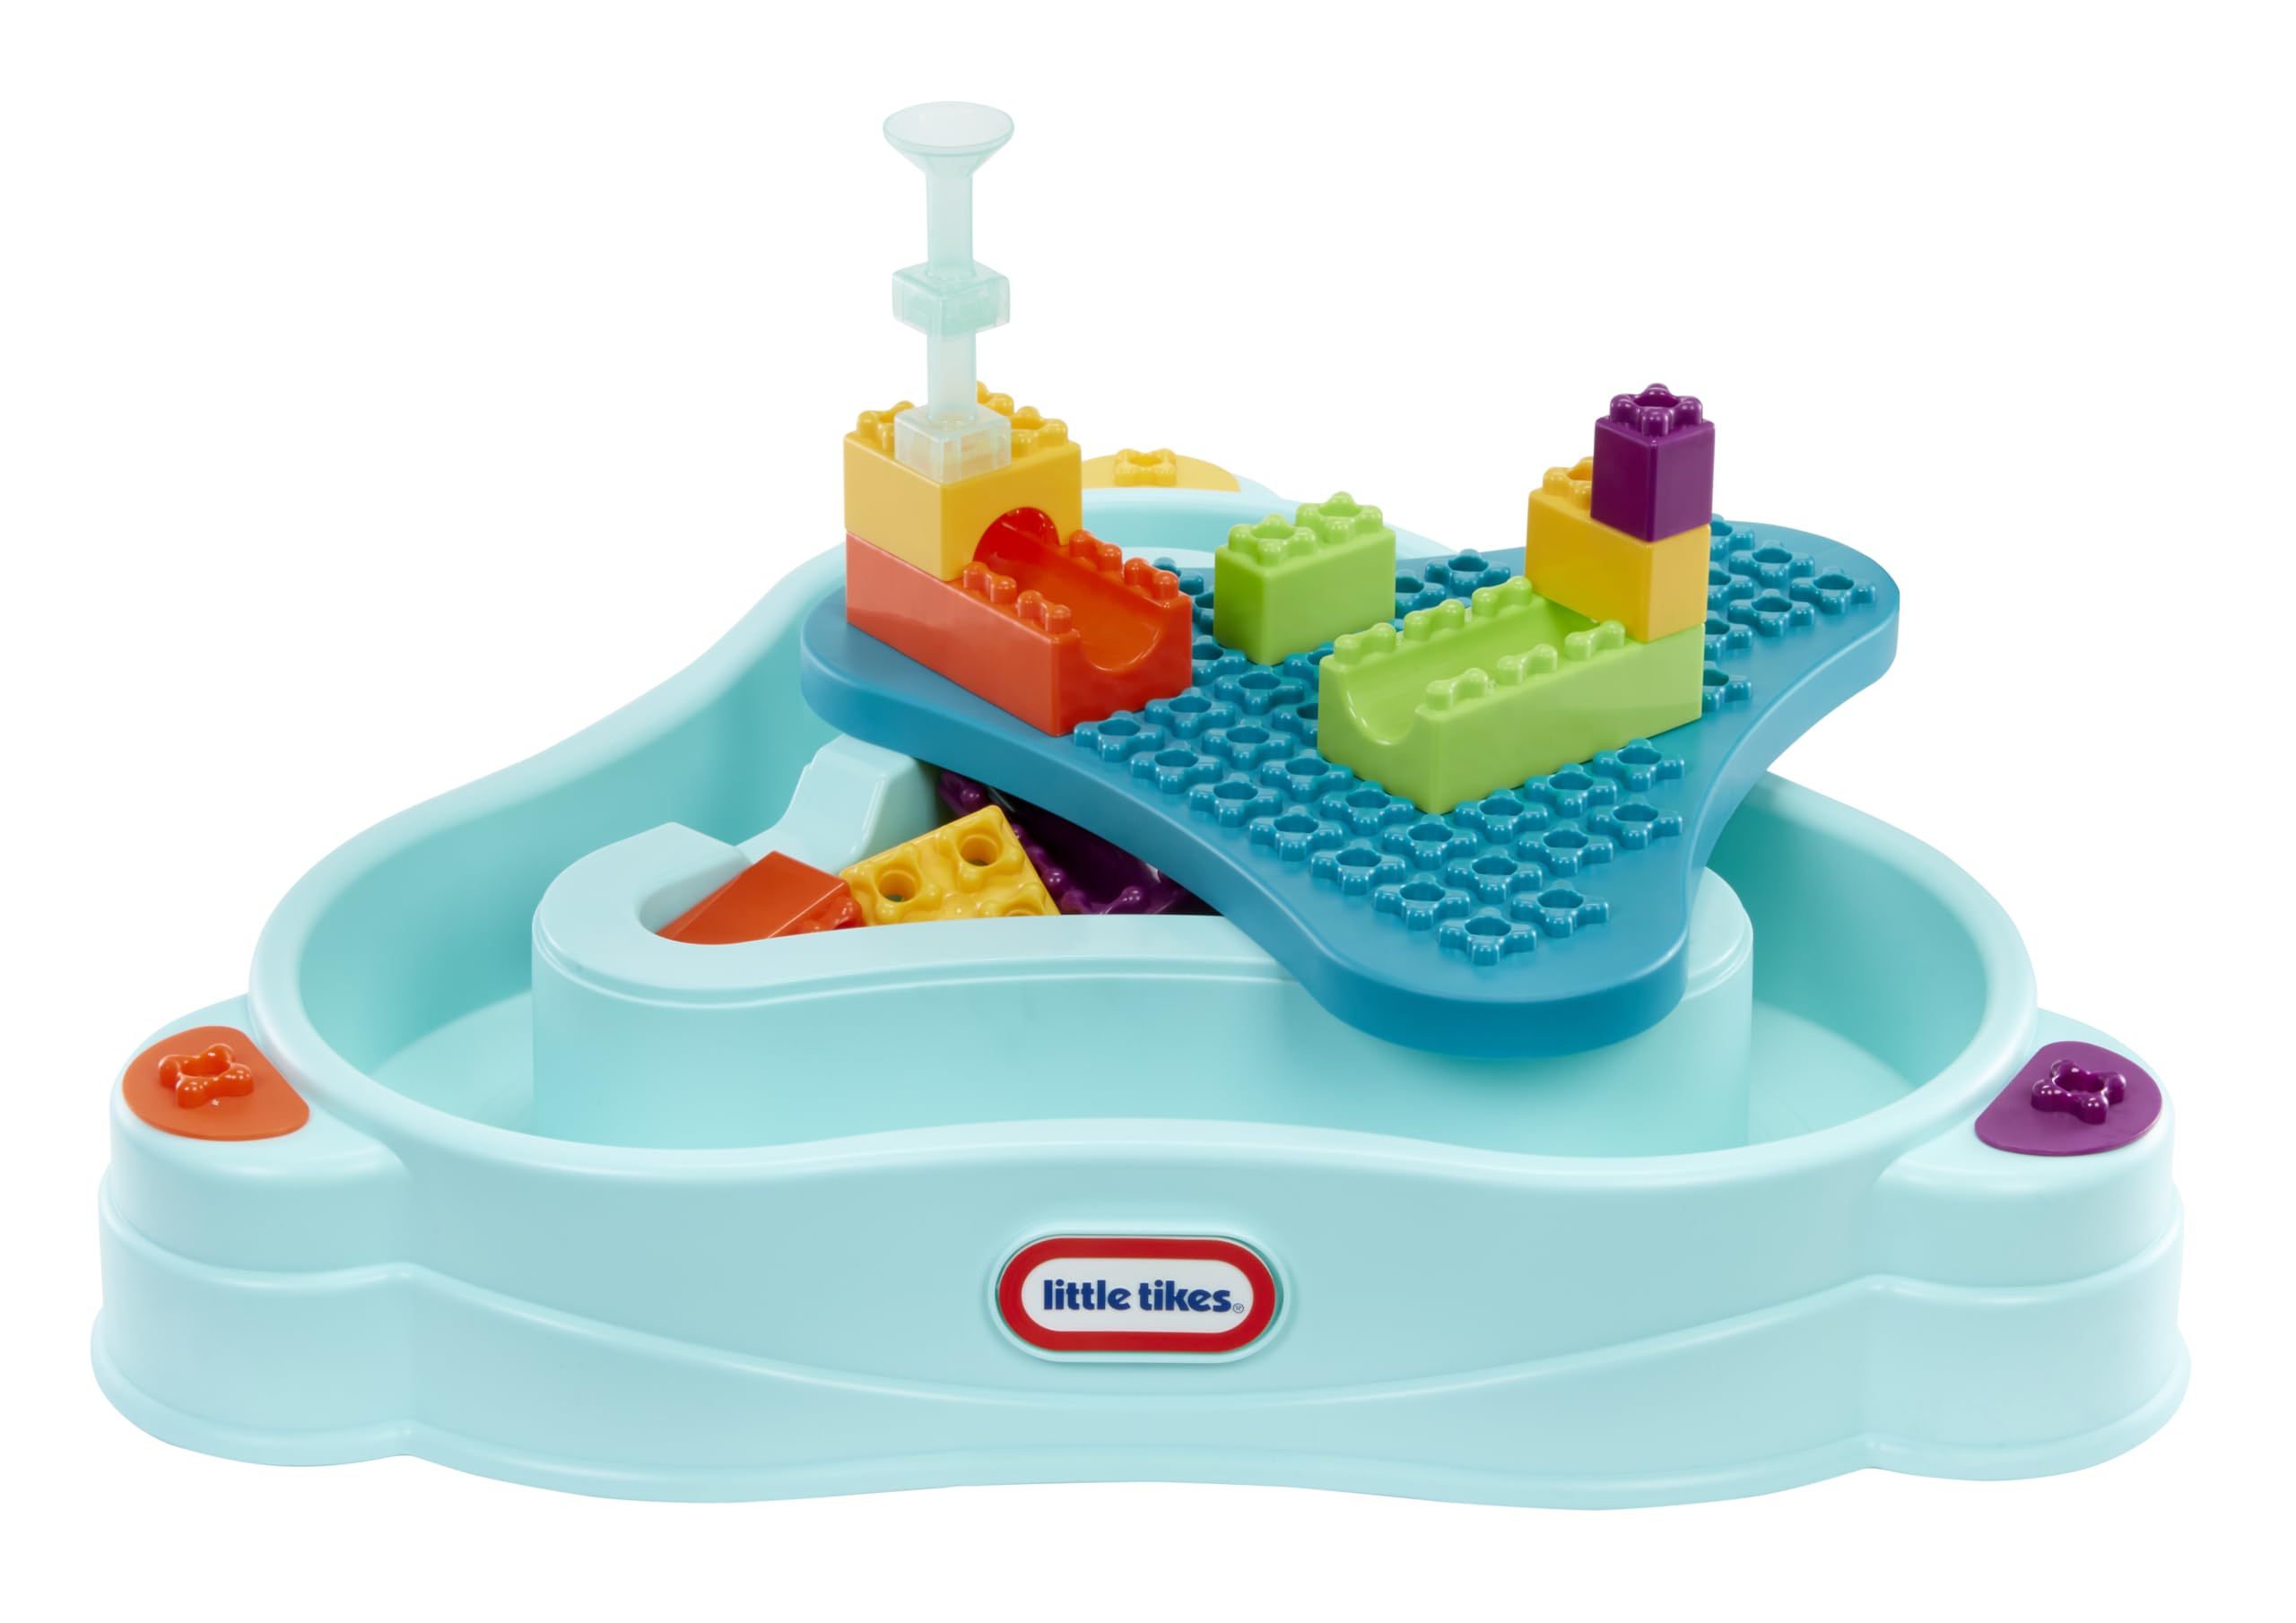 Little Tikes Build & Splash Water Table with 25 Piece Accessories - Wet/Dry Play, Indoor/Outdoor with Removeable Grow-with-Me Legs